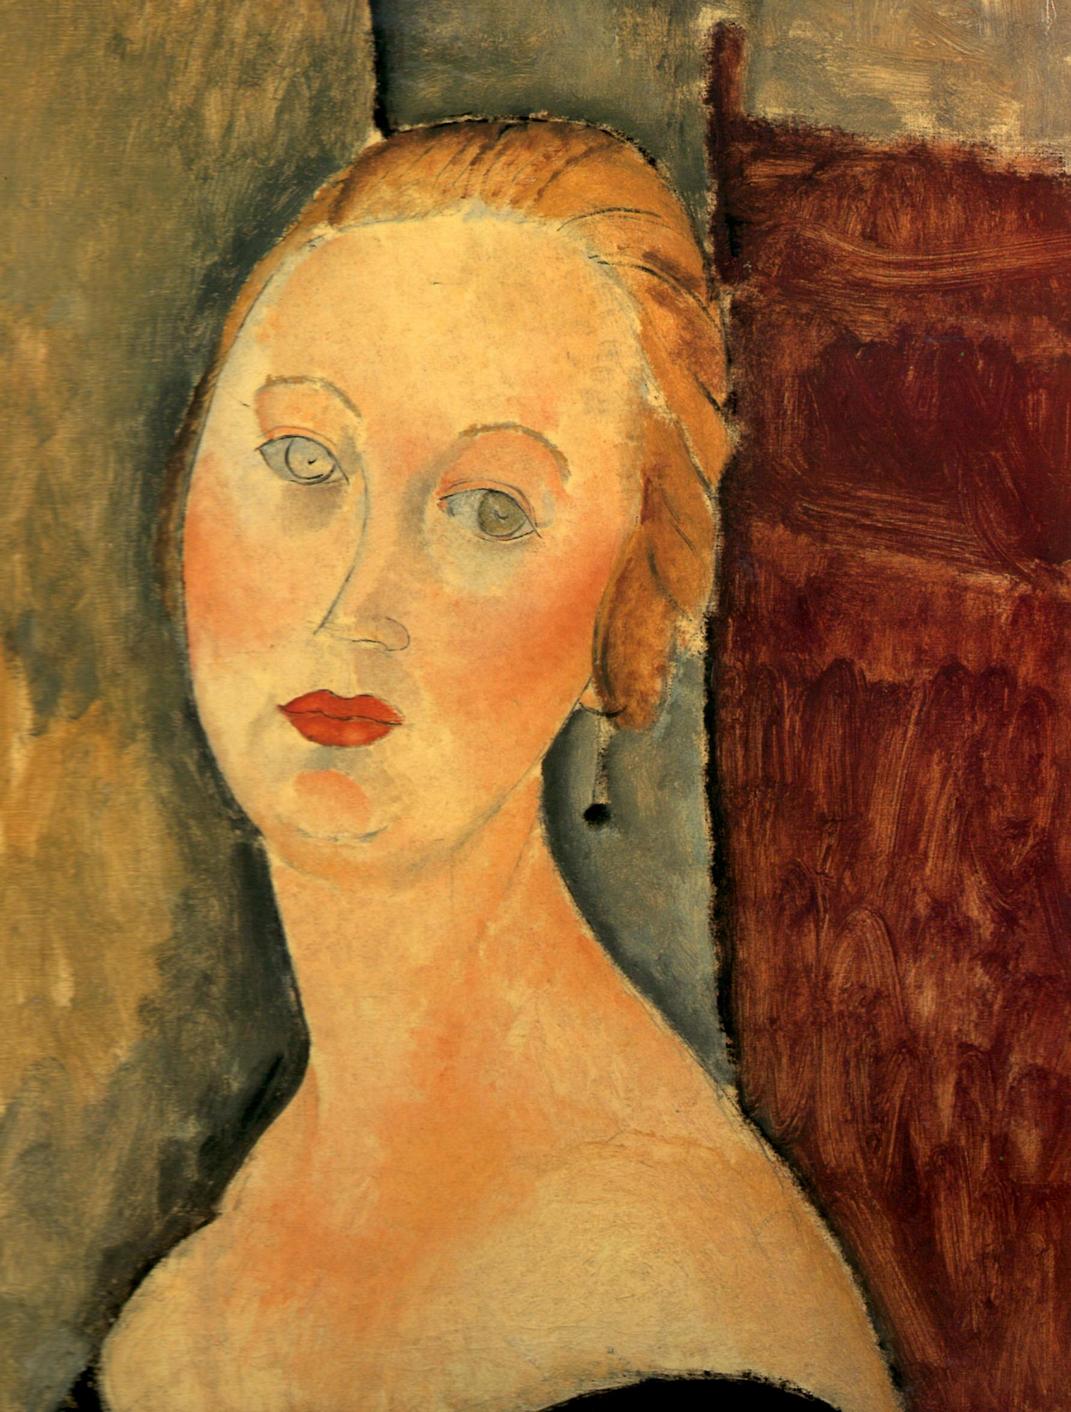 Amedeo Modigliani - Germaine Survage with Earrings 1918